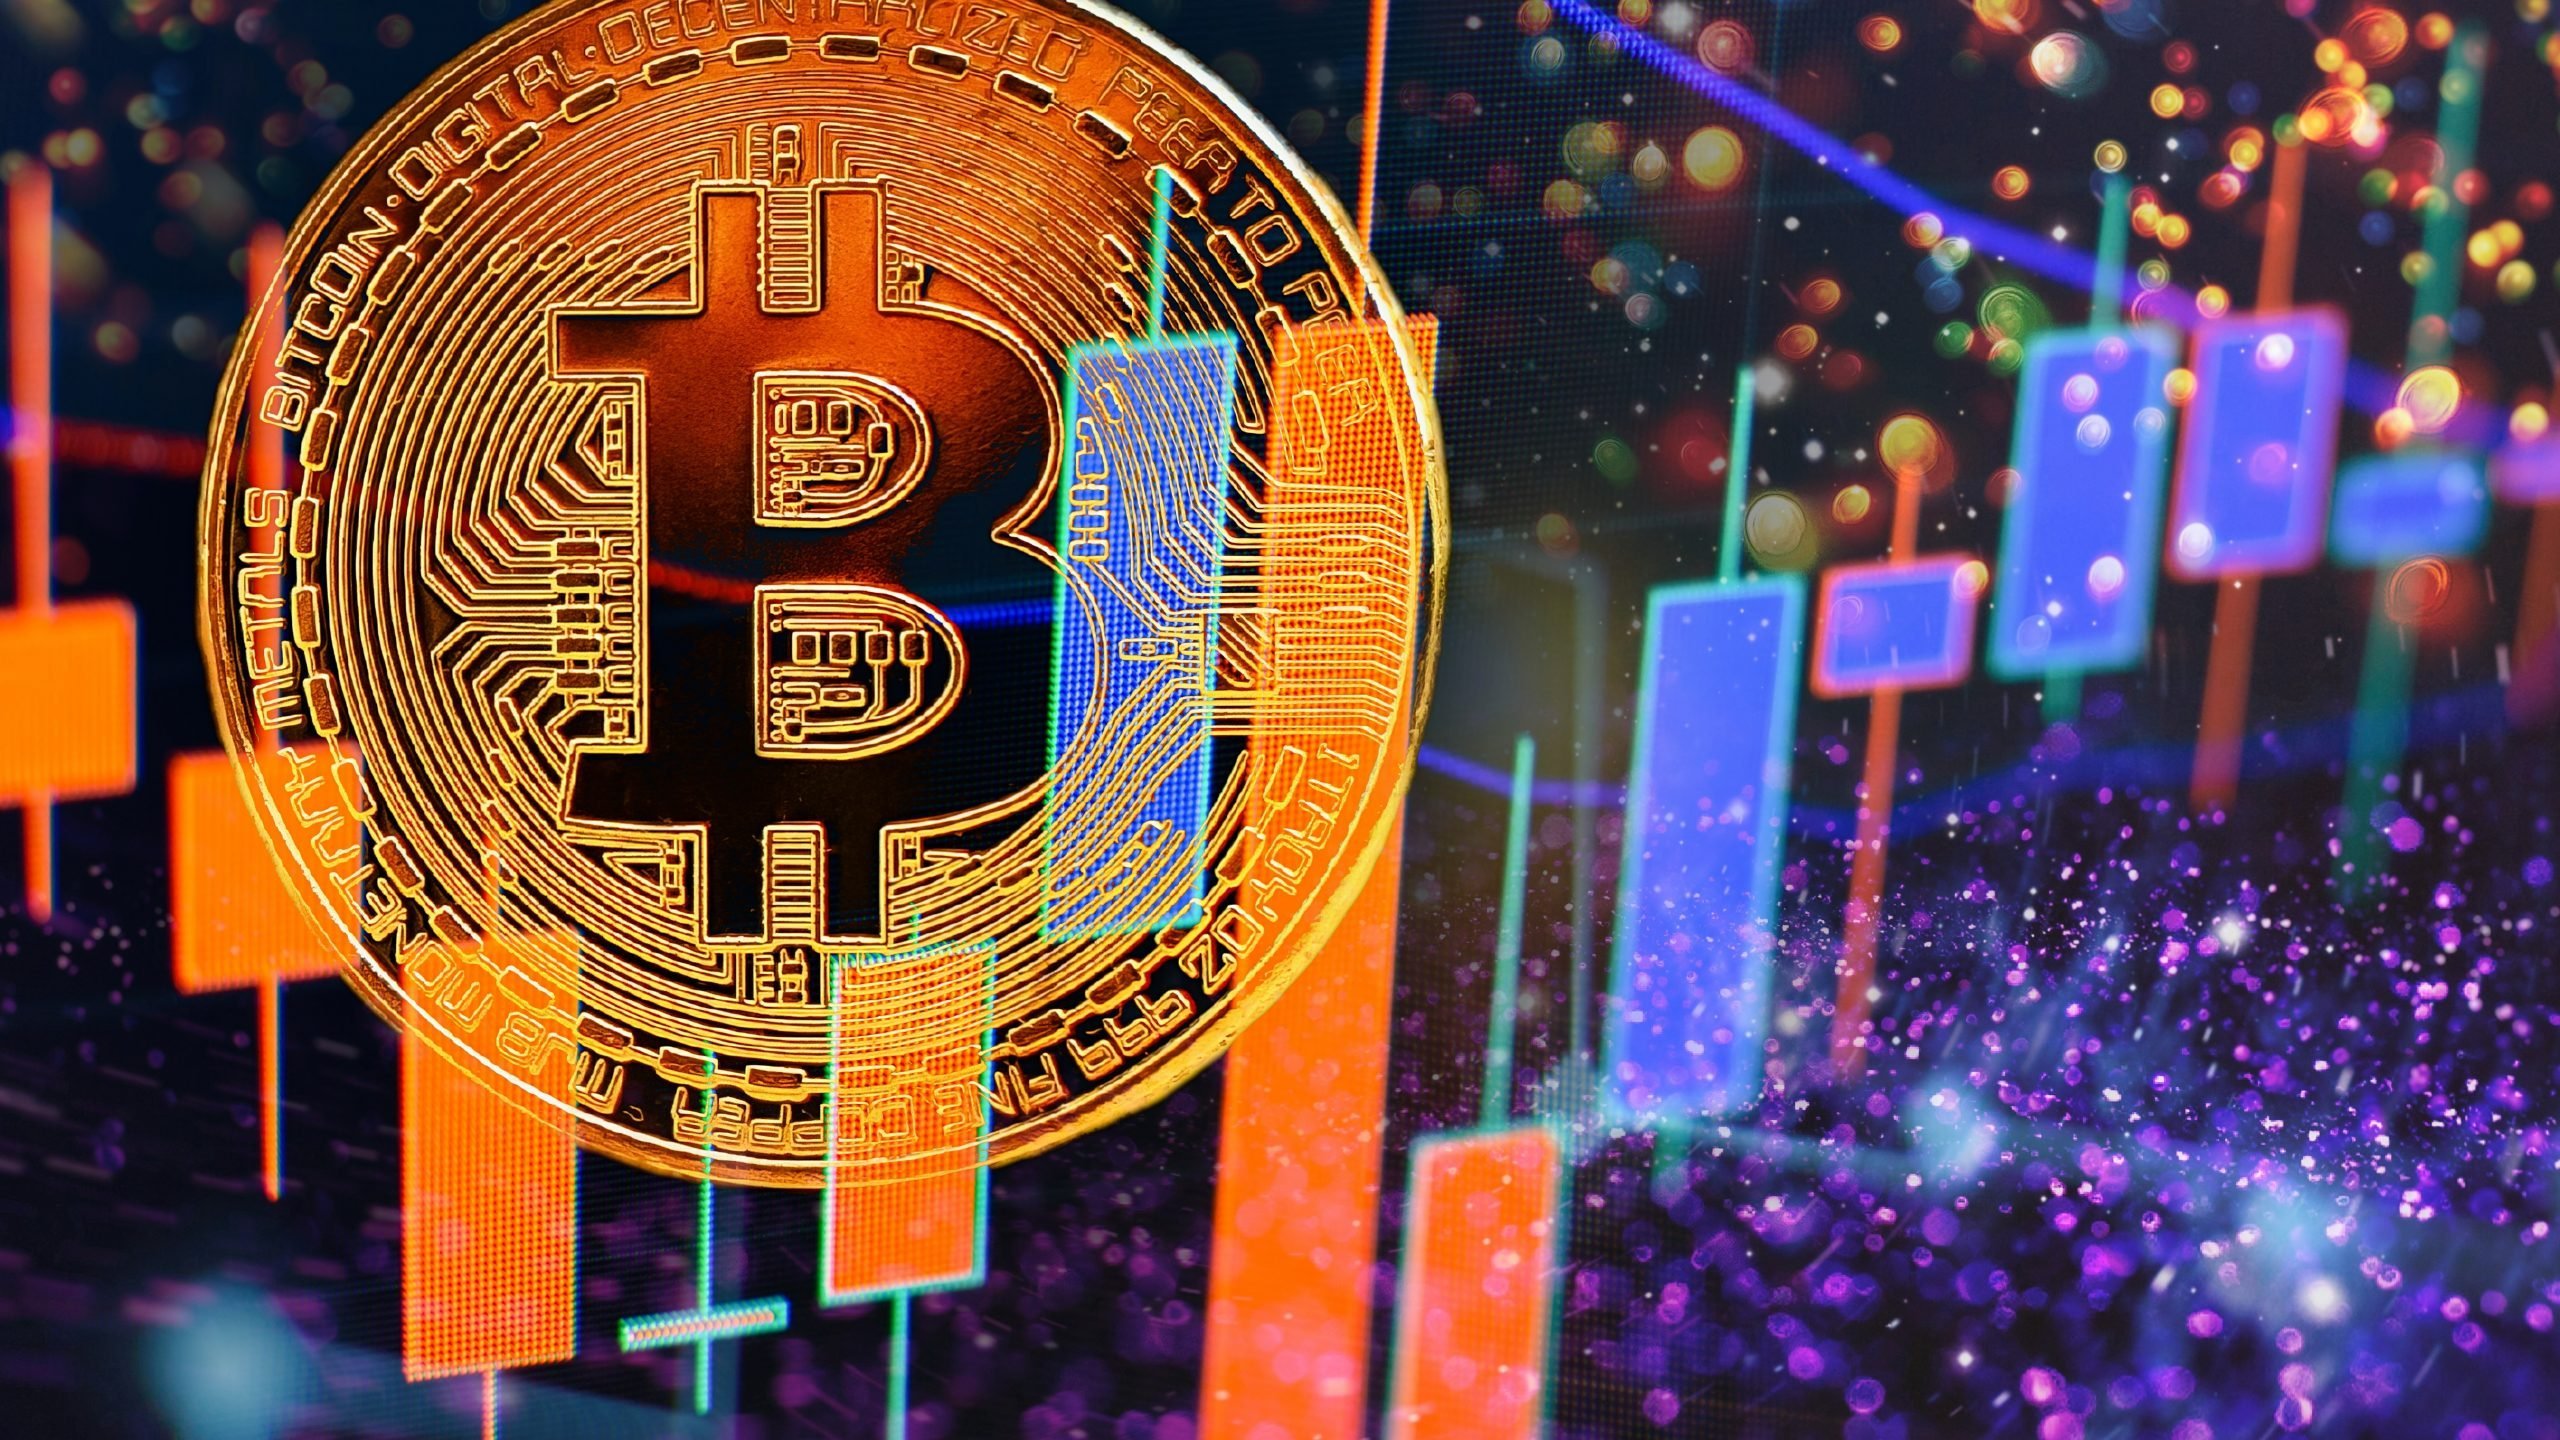 A large physical Bitcoin shown behind red and blue price candles (bitcoin investing)